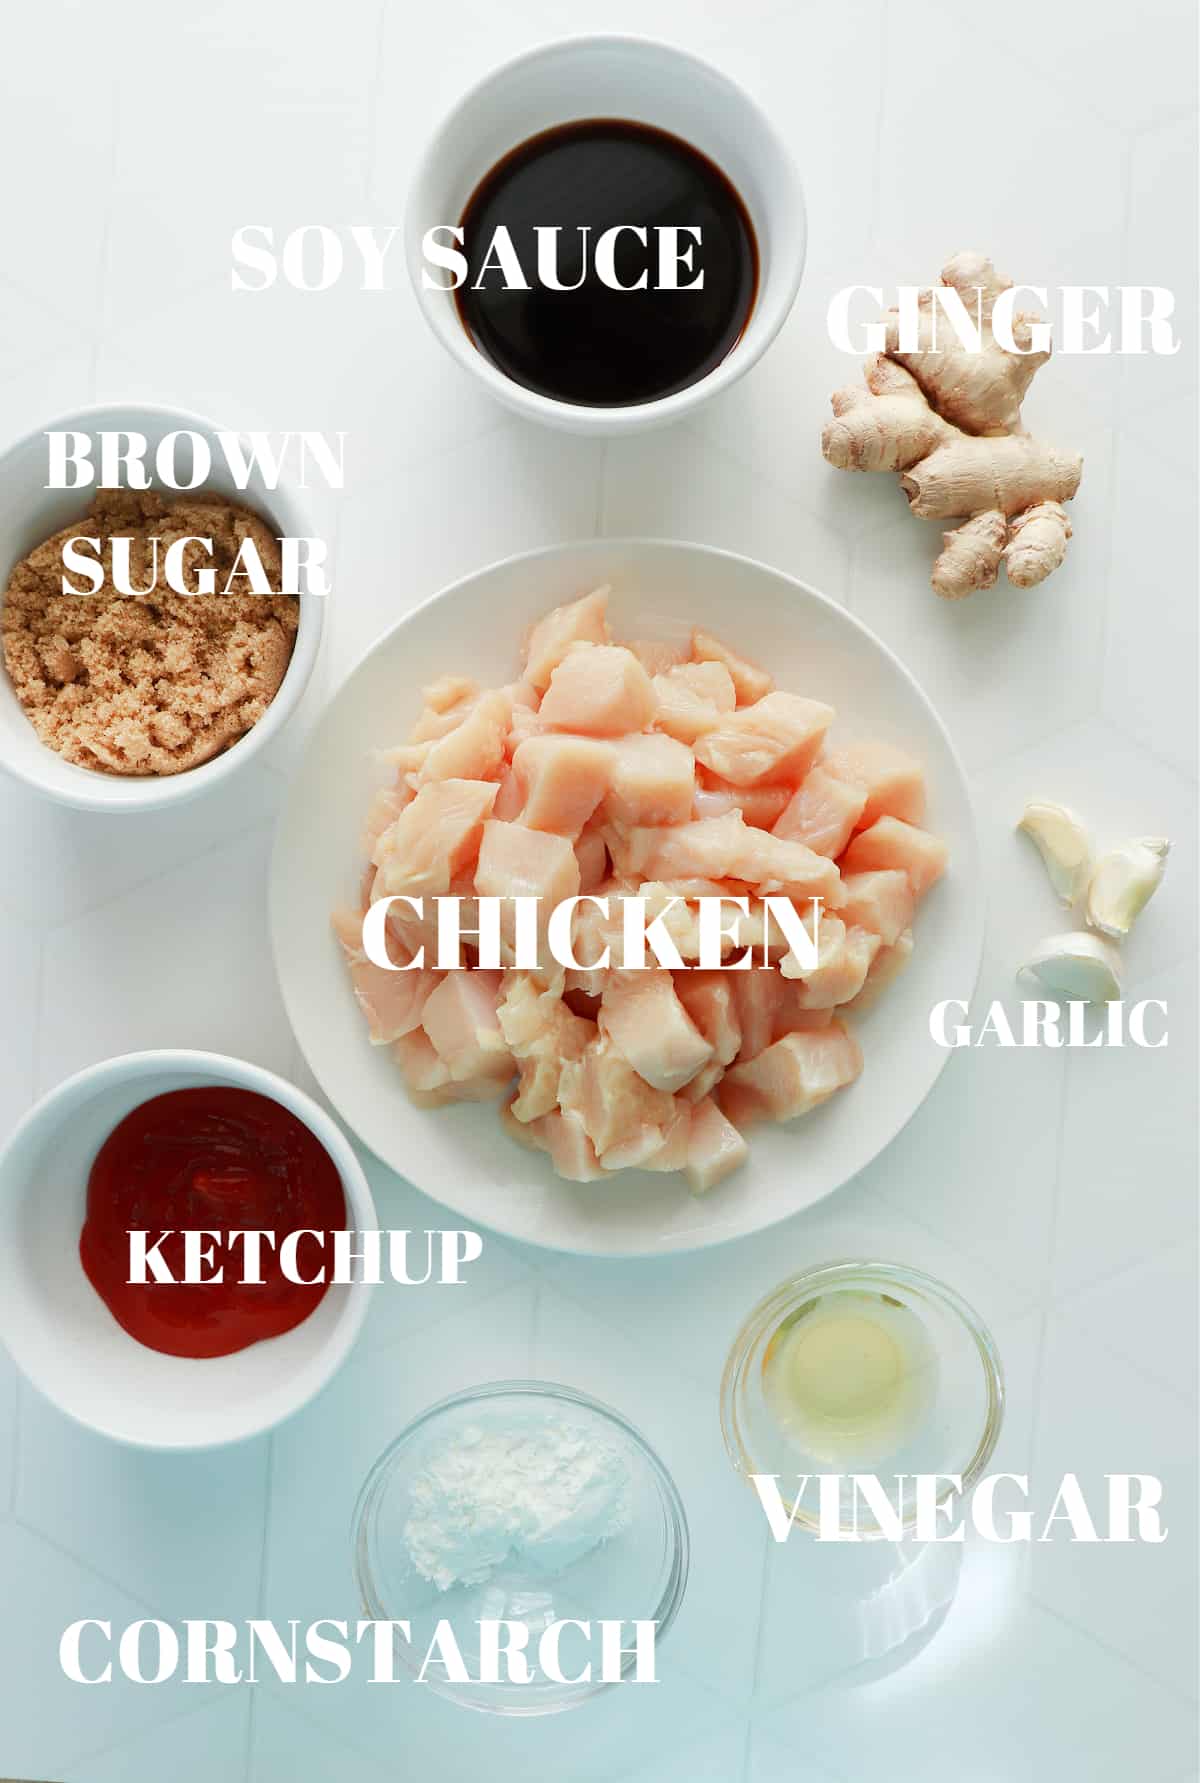 Chicken, soy sauce, ginger, garlic, cornstarch, vinegar, ketchup and brown sugar in bowls on a white tile board.